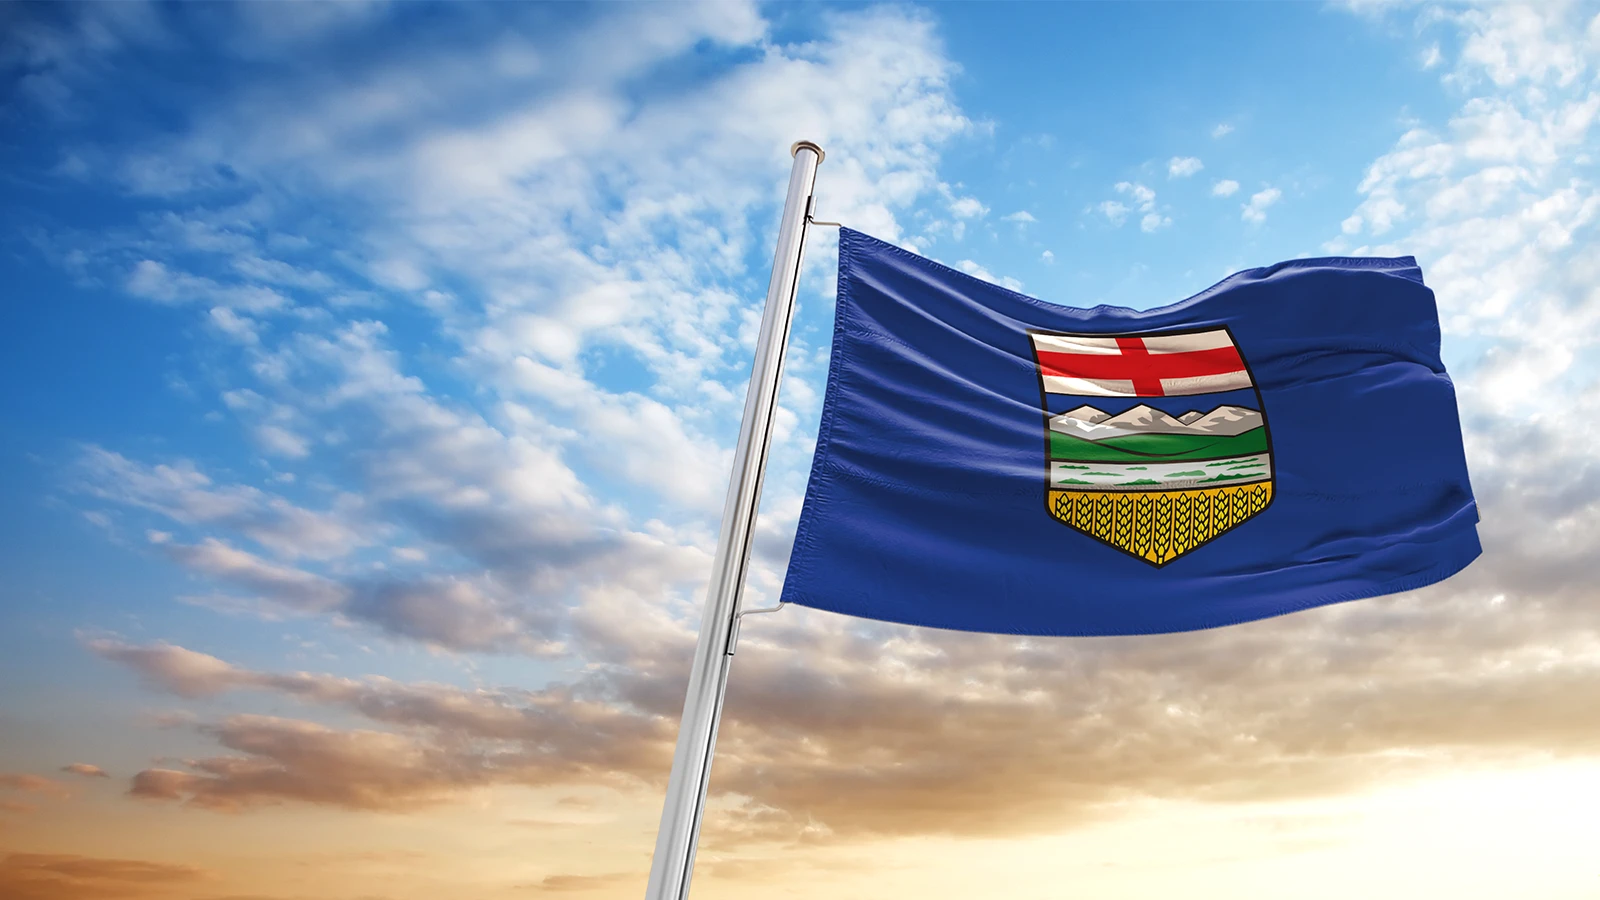 Alberta flag blowing in the wind